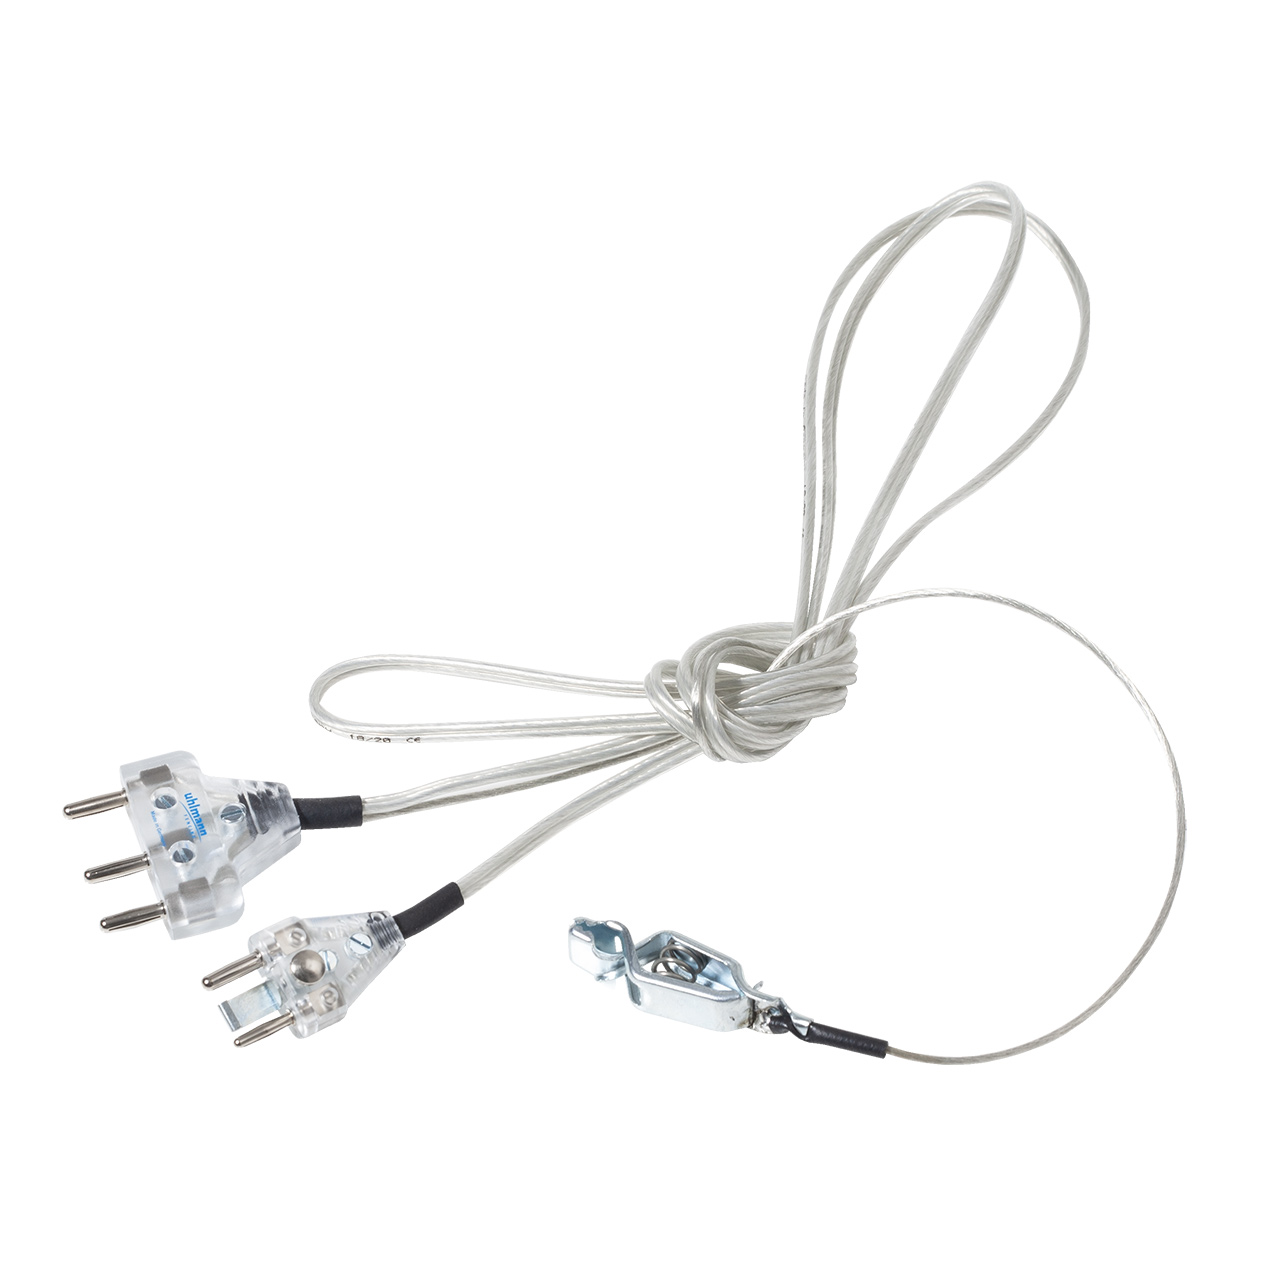 foil / sabre body cord "Silver", with transparent cable plugs